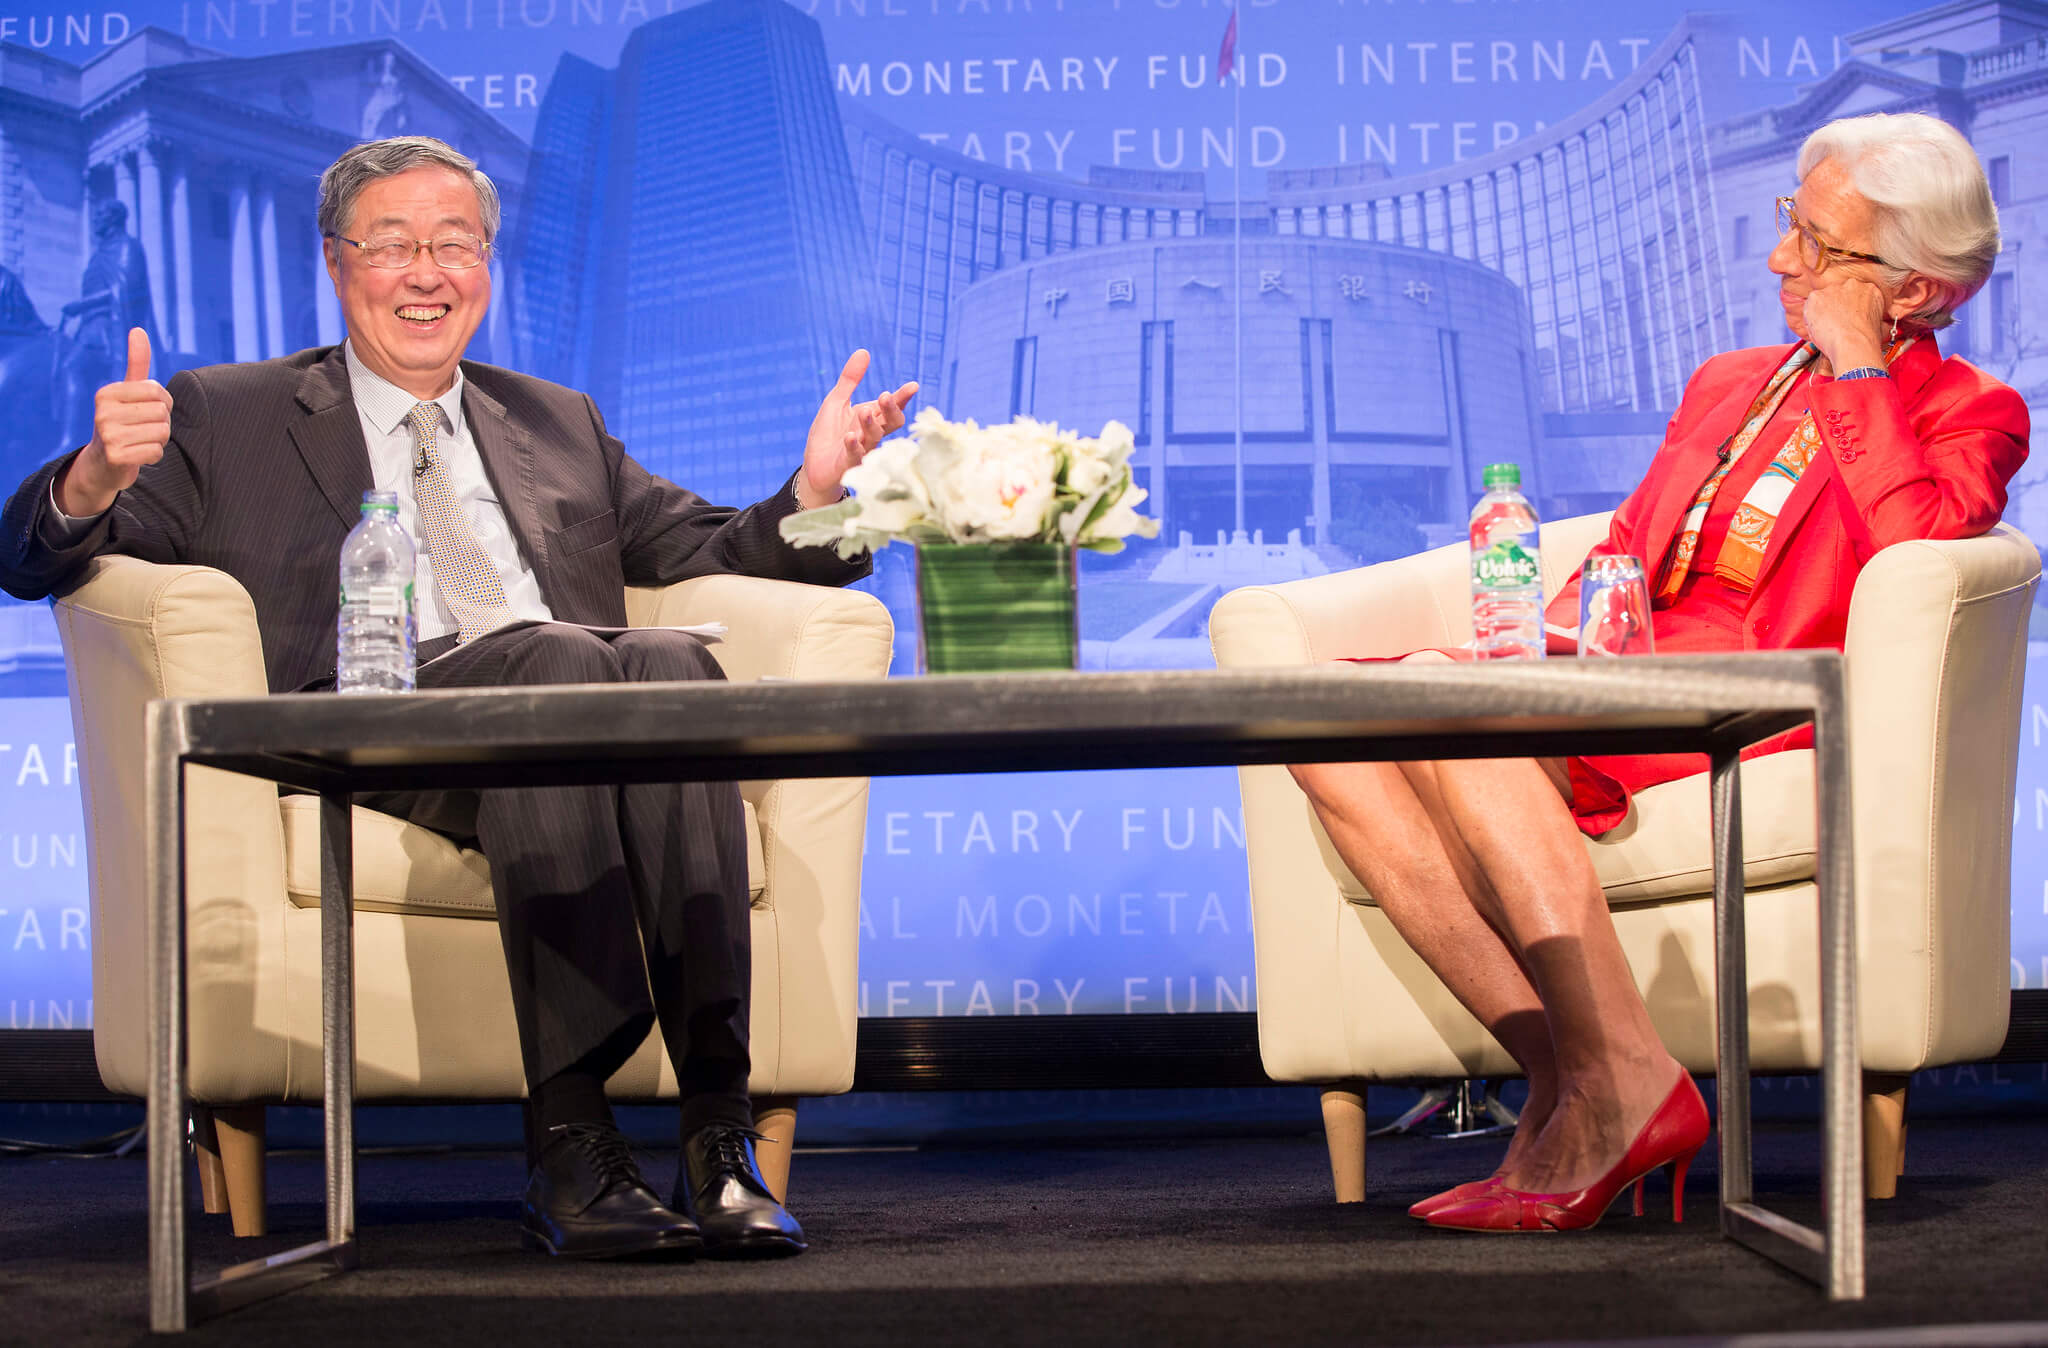 Christine Lagarde, president of the European Central Bank, and Zhou Xiachuan, governor of the People's Bank of China, discuss during the 'Michel Camdessus Central Banking Lecture', IMF Headquarters, 24 June 2016. © IMF Staff Photo, Stephen Jaffe / Flickr